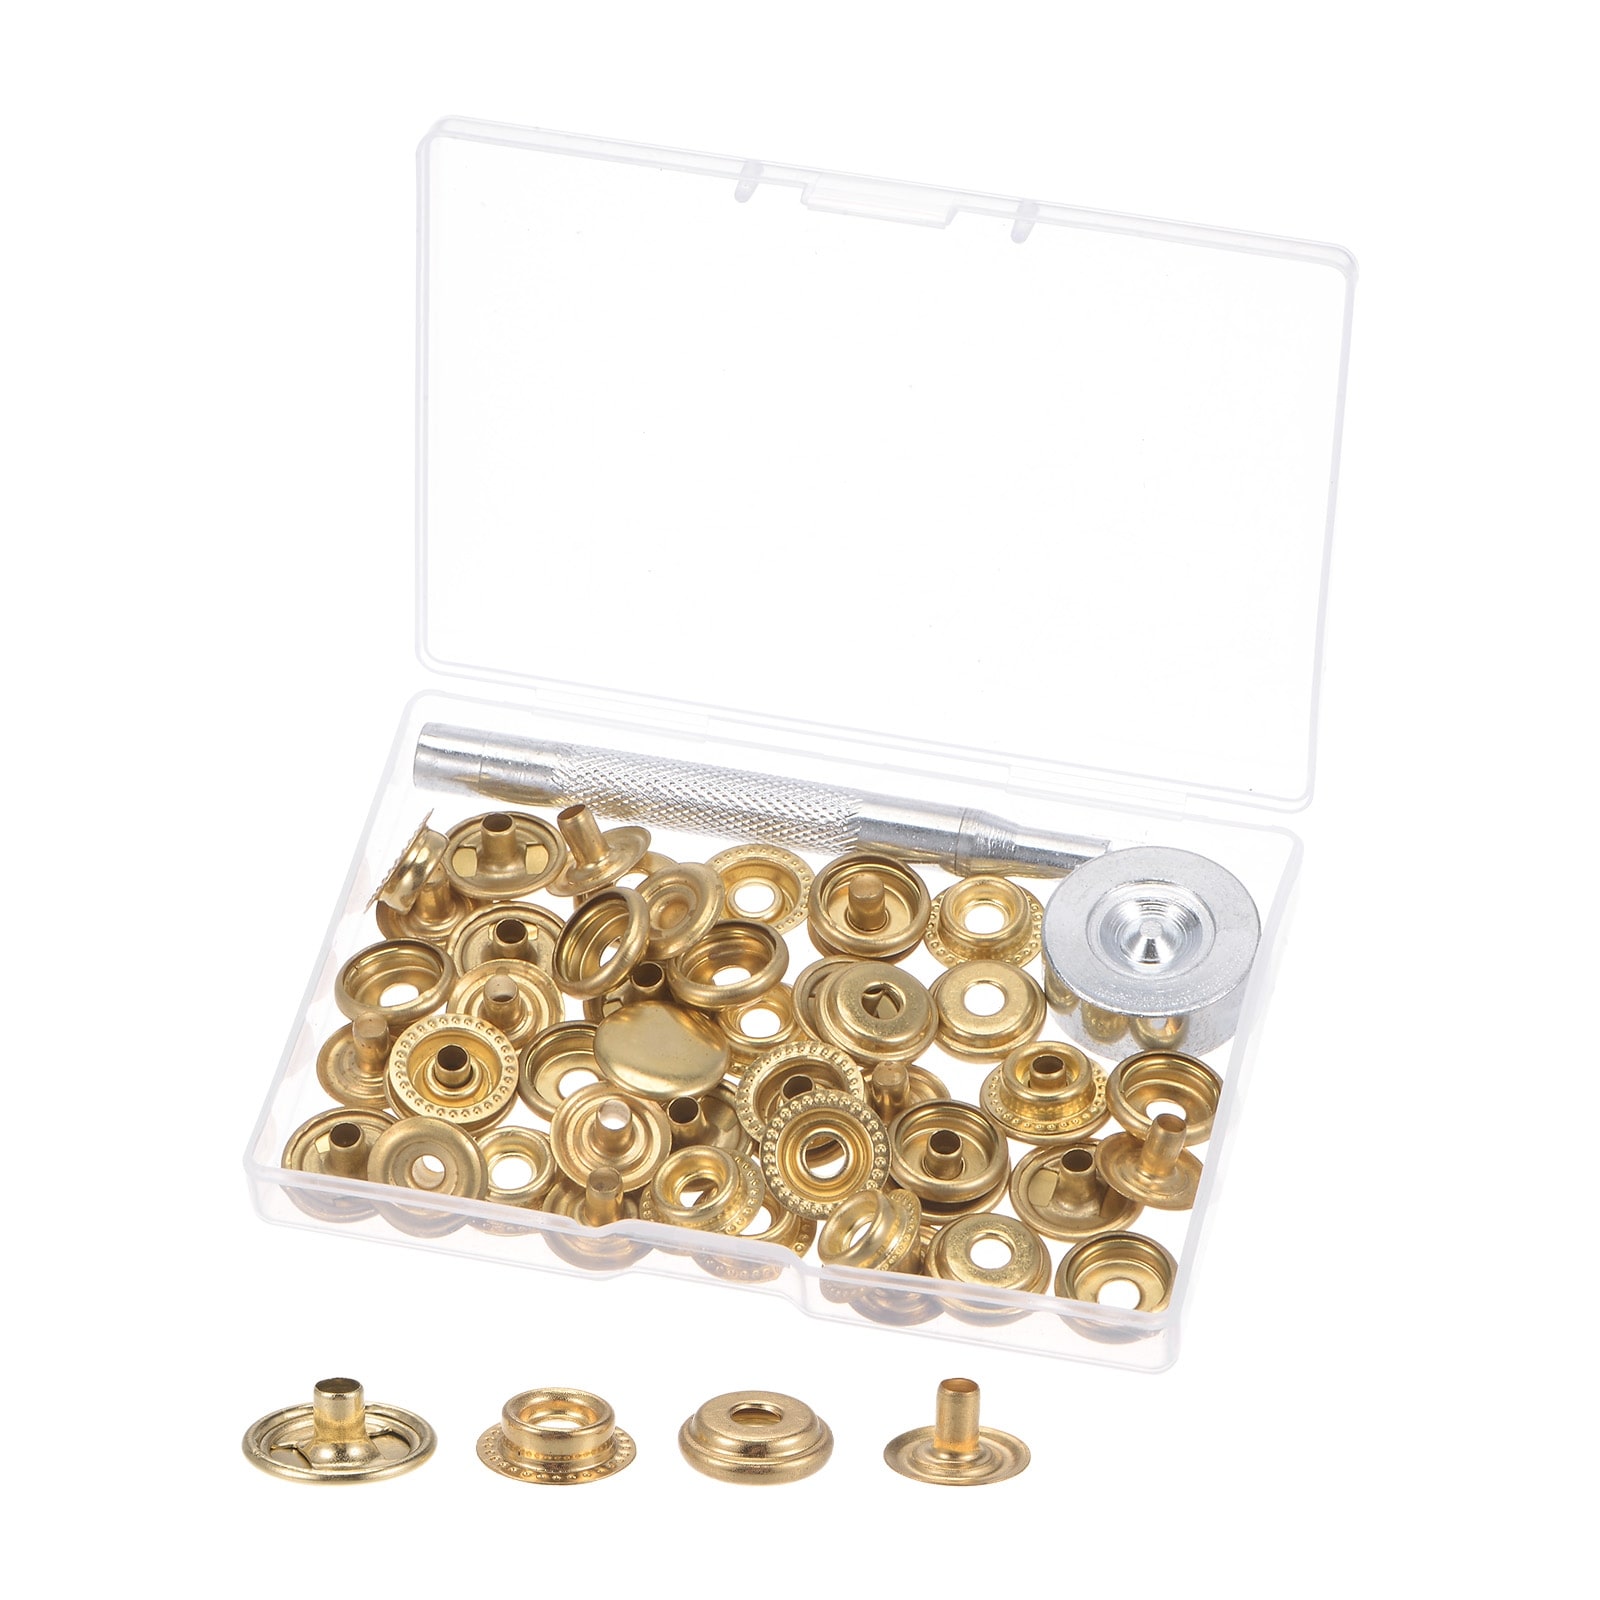 12set Leather Snap Fasteners Kit,15mm Brass Button Snaps Press